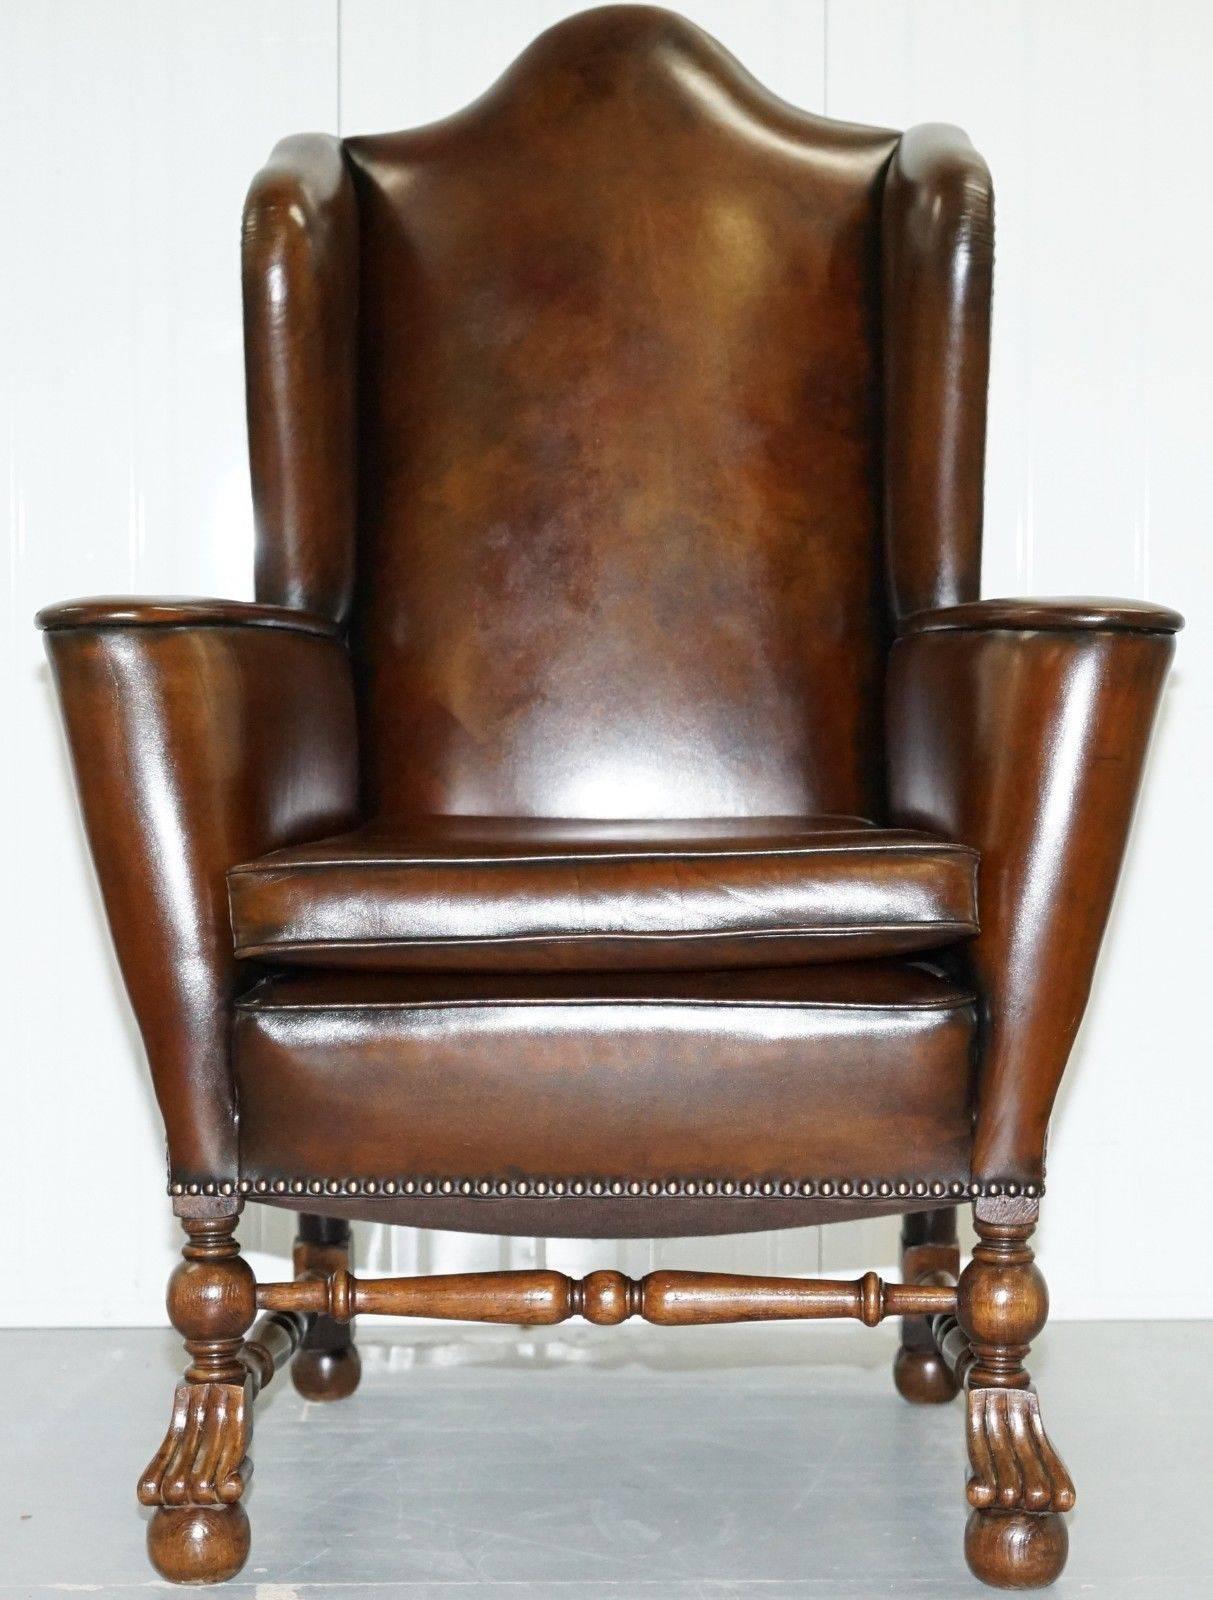 We are delighted to offer for sale this stunning 18th century circa 1760 Dutch wingback armchair

A very tall well made and very solid heavy armchair with traditional coil sprung base, the leather patina is to die for, you can only achieve this